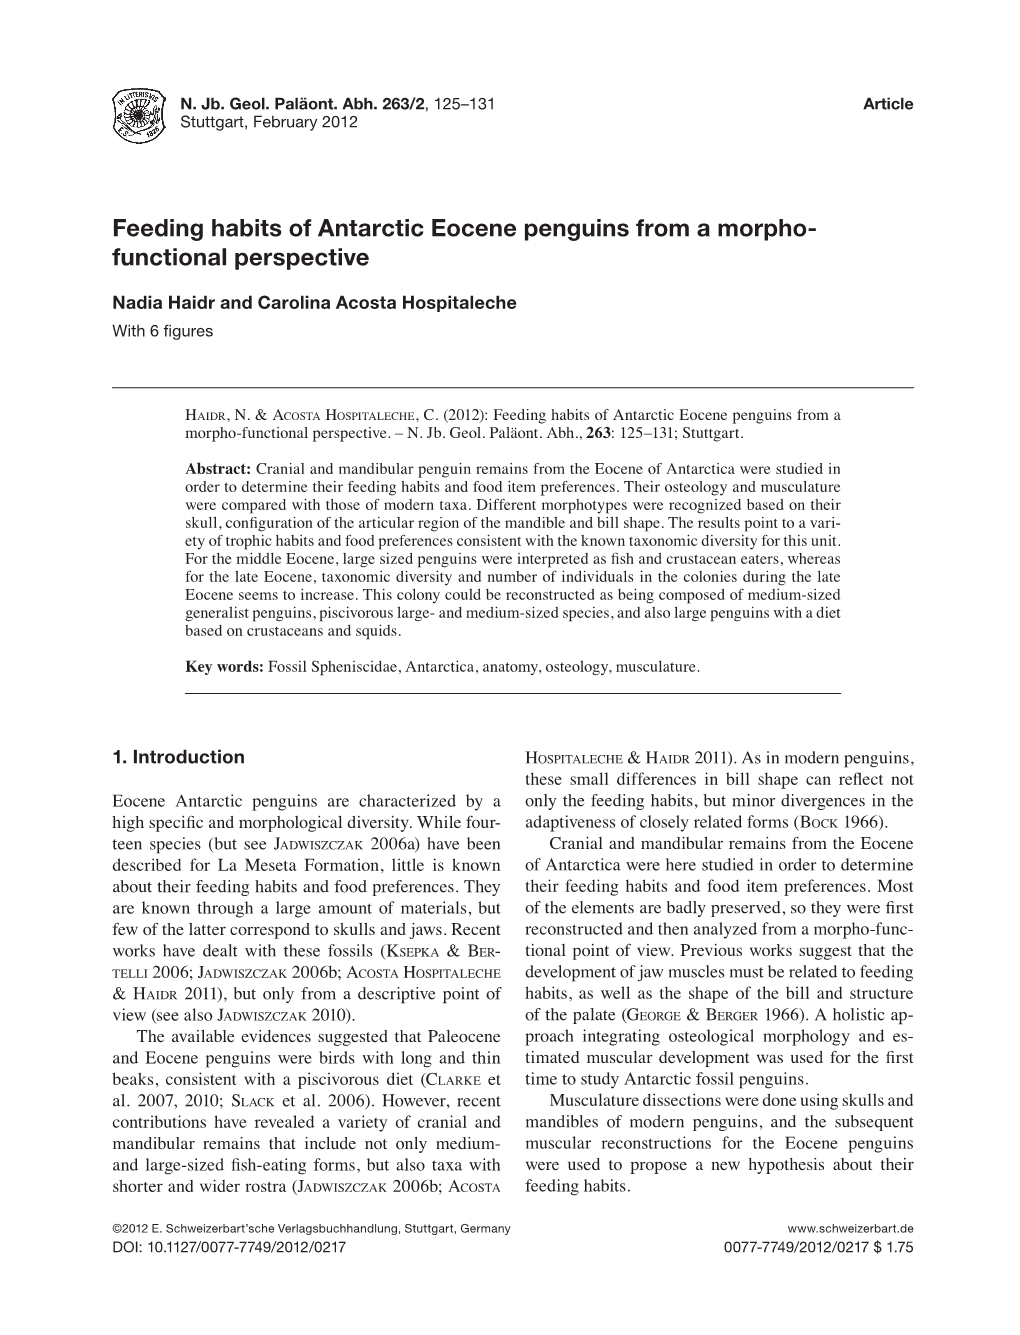 Feeding Habits of Antarctic Eocene Penguins from a Morpho- Functional Perspective